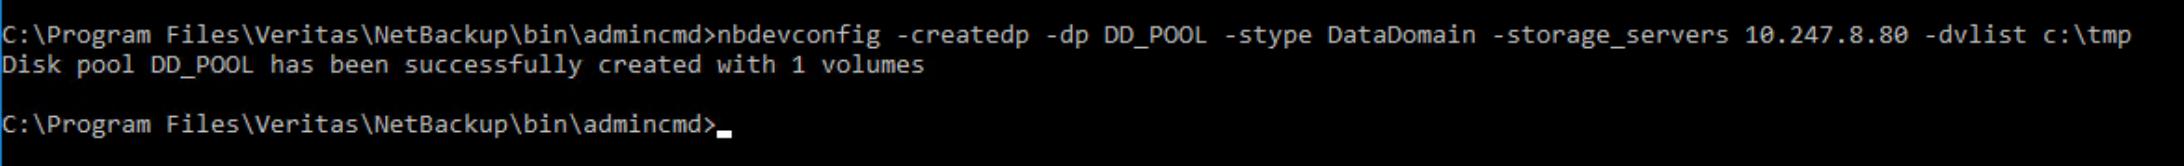 This image shows the command line option to create a disk pool 